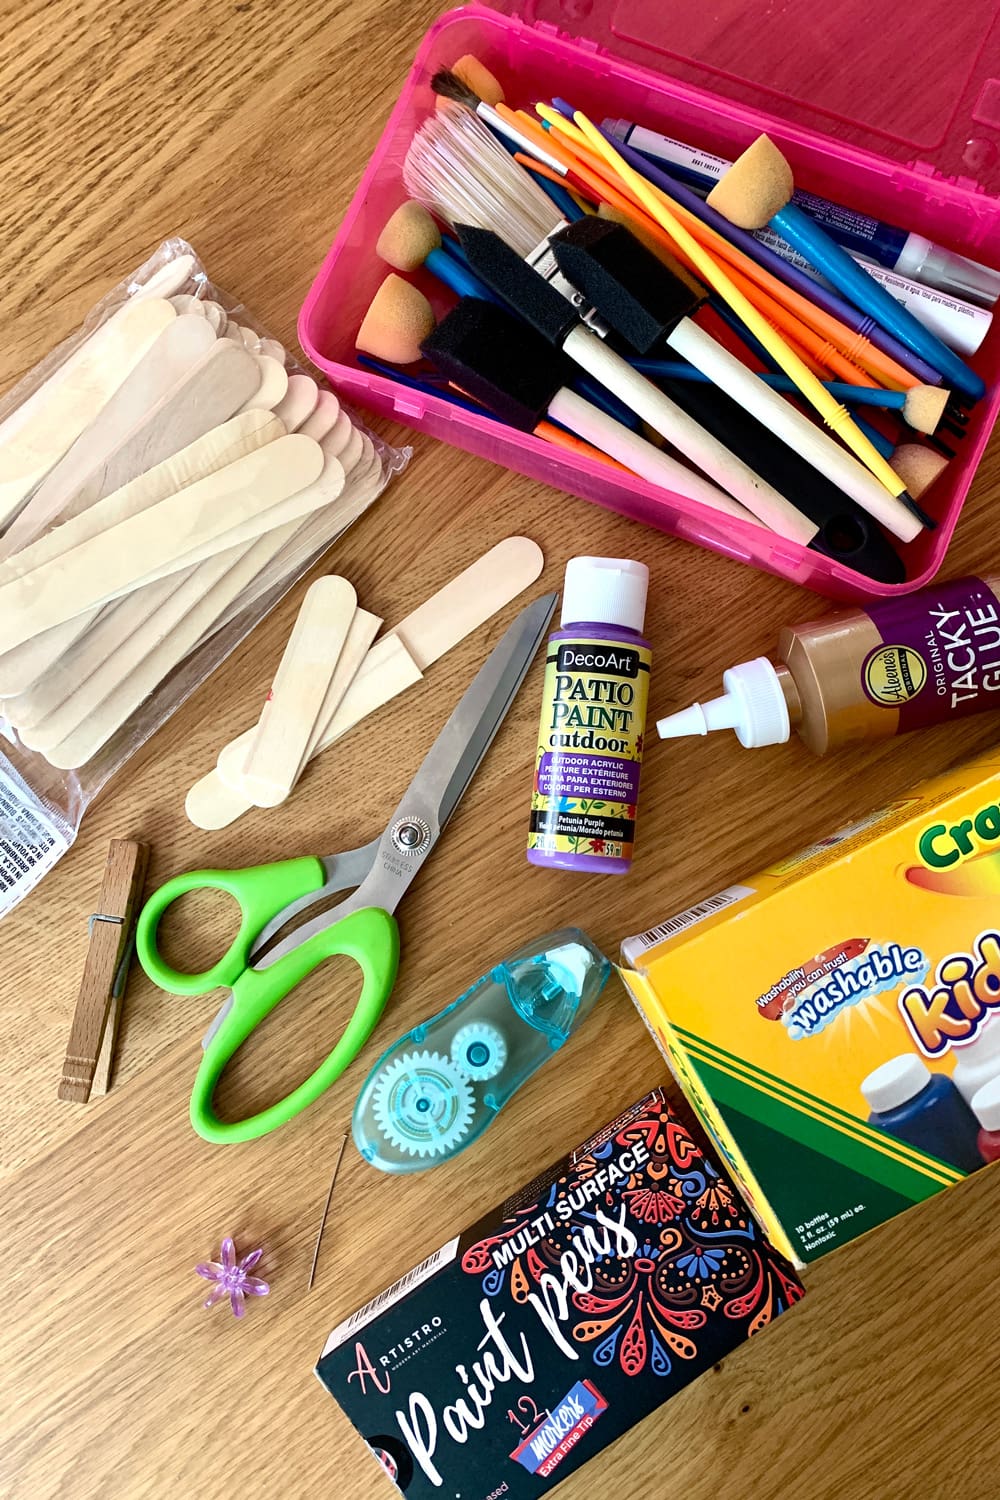 Scattered craft supplies including paintbrushes, popsicle sticks, scissors, paint, craft glue, glue dots, a clothespin, a whirly bead, and a head pin.